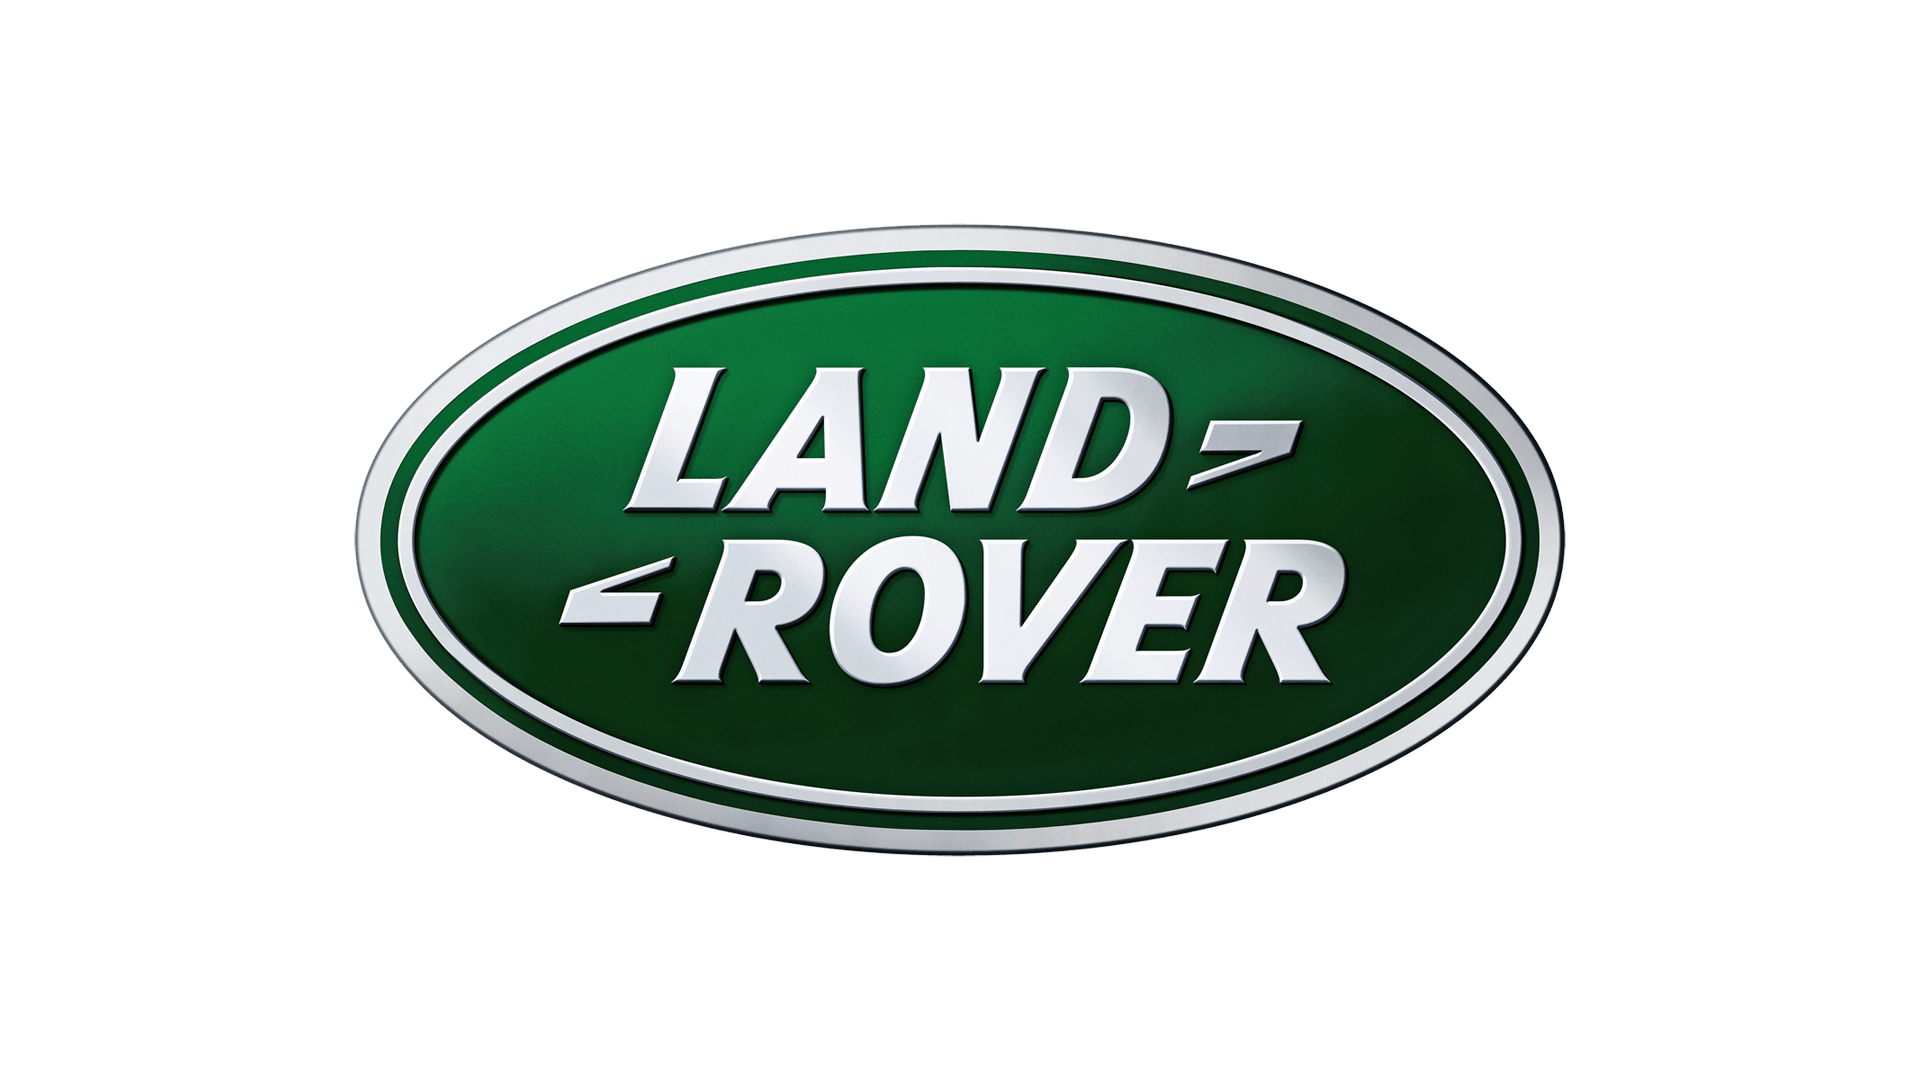 Land Rover by Blibli Official Store